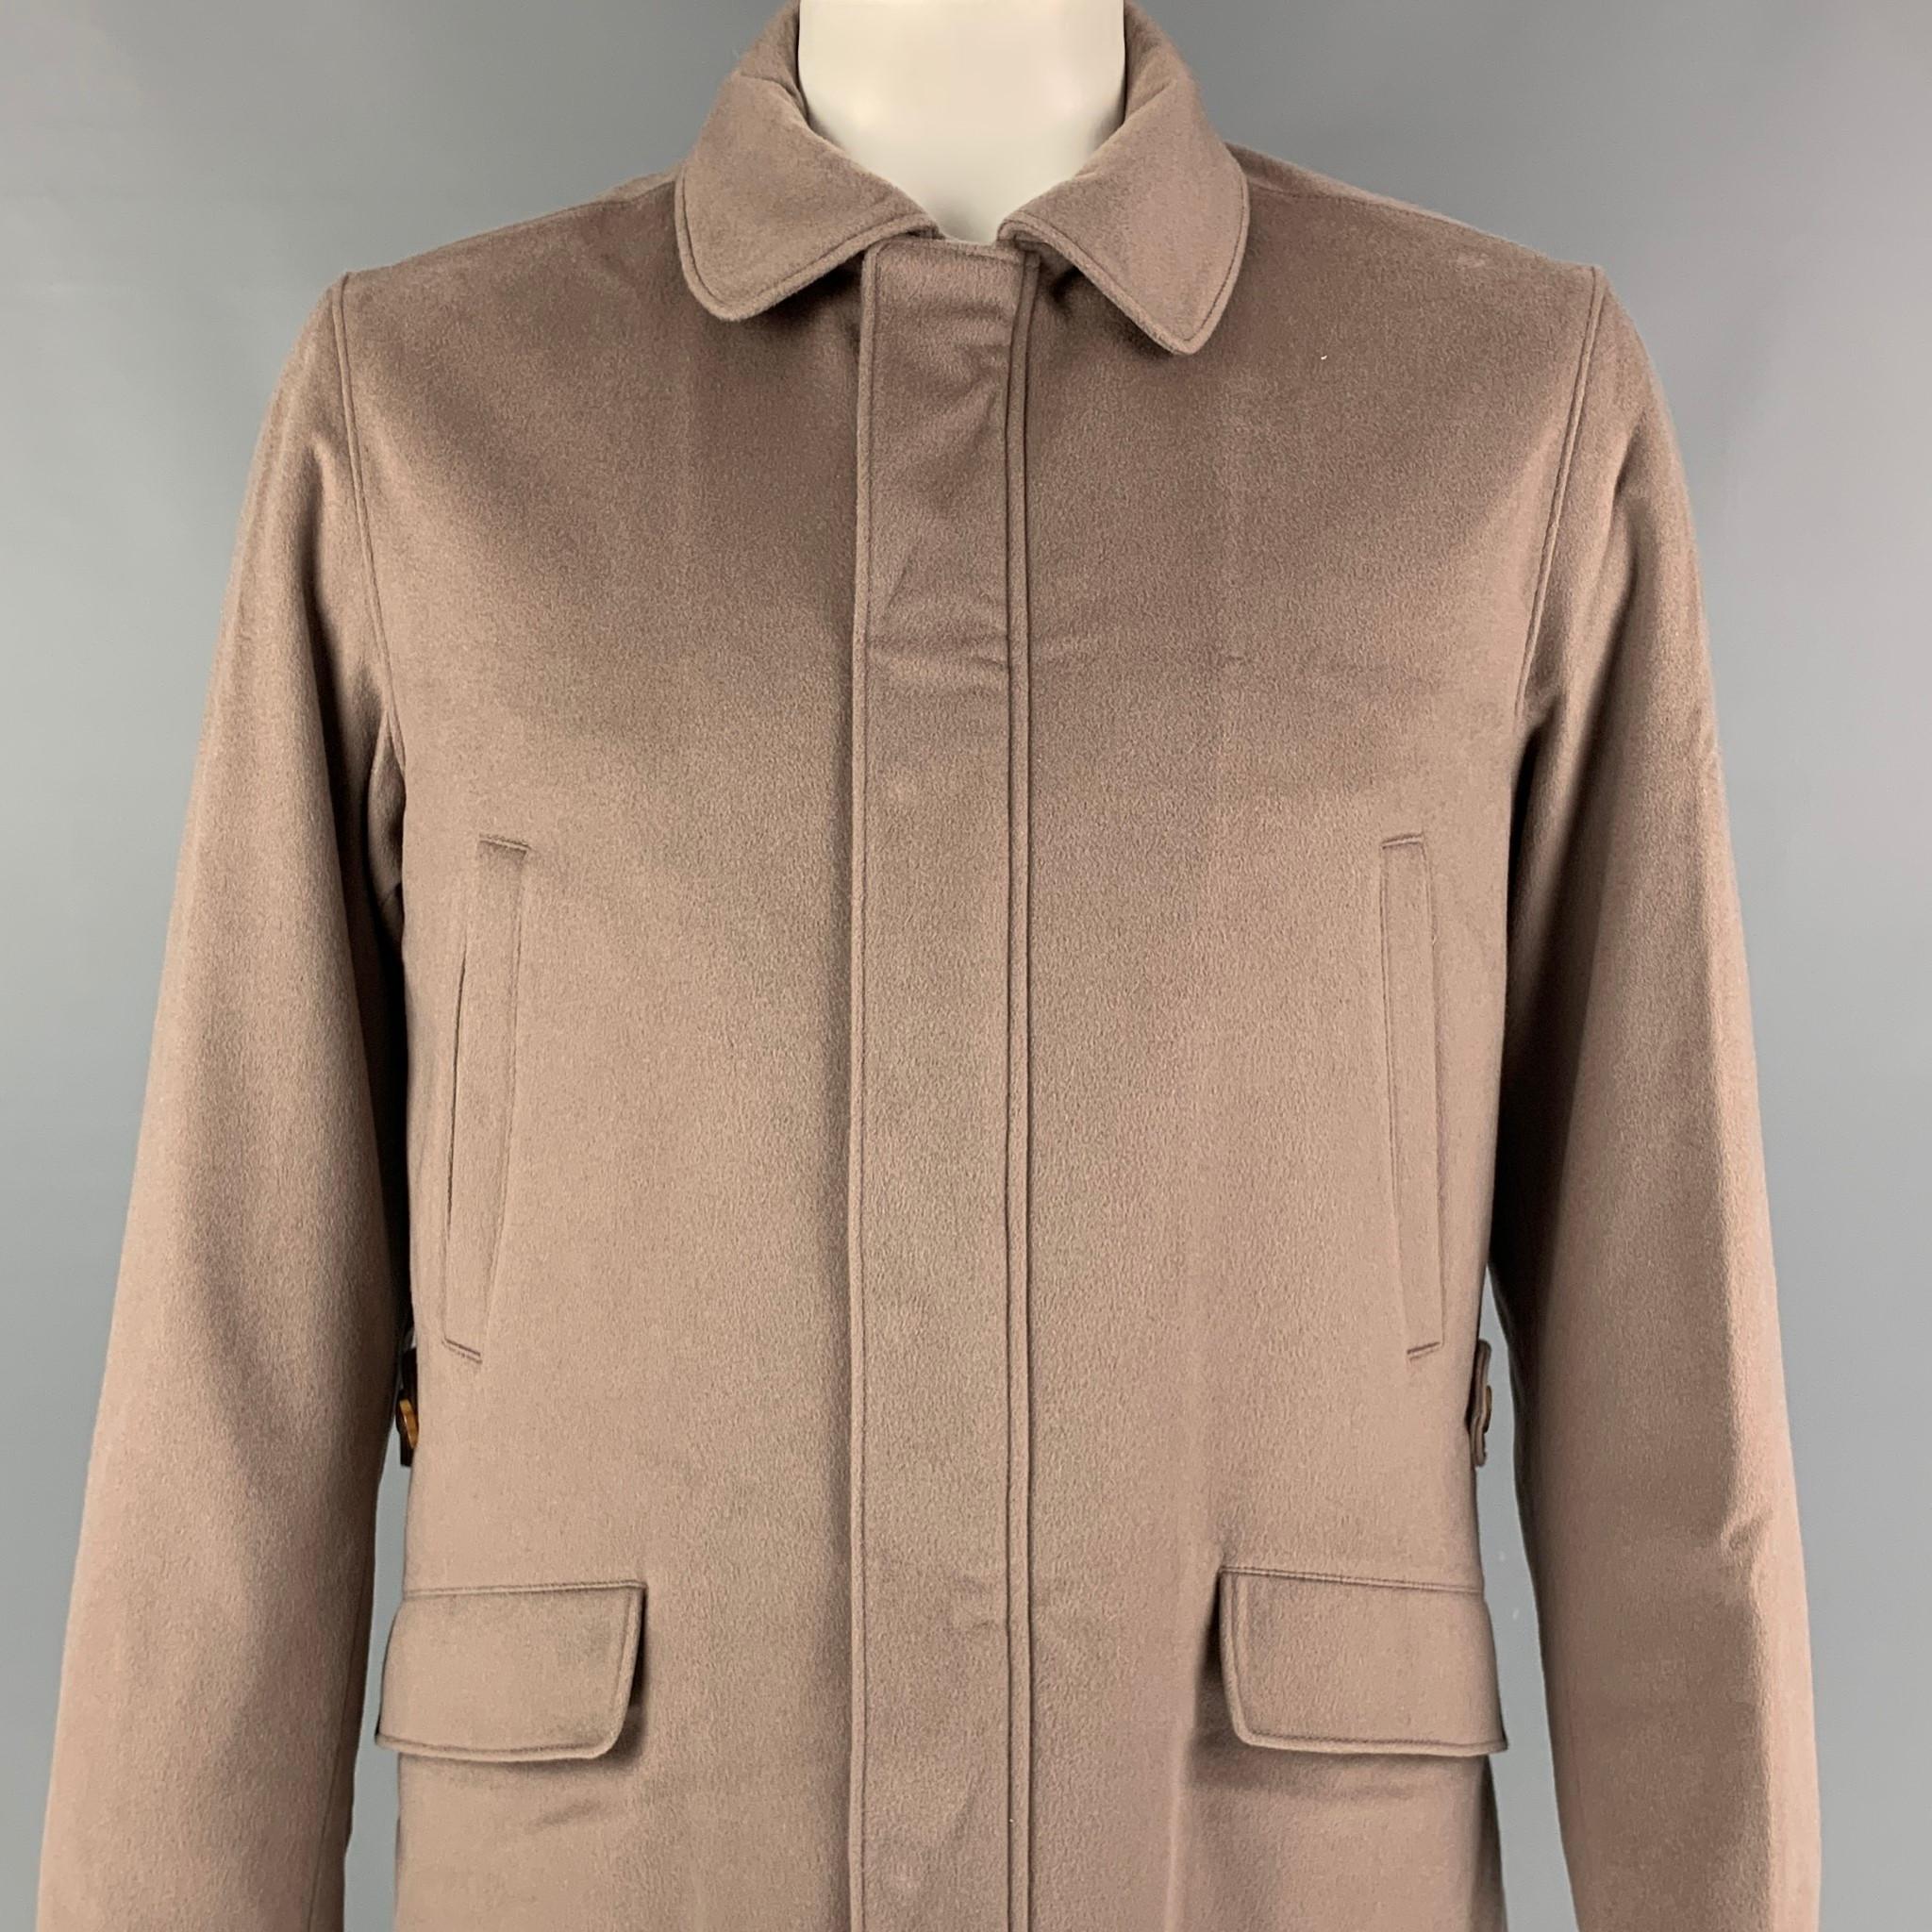 LORO PIANA 'Storm System' jacket comes in a taupe cashmere with a full liner featuring a rain & wind protection, front pockets, double back vent, and a hidden placket closure. Made in Italy. 

New With Tags.
Marked: L
Original Retail Price: